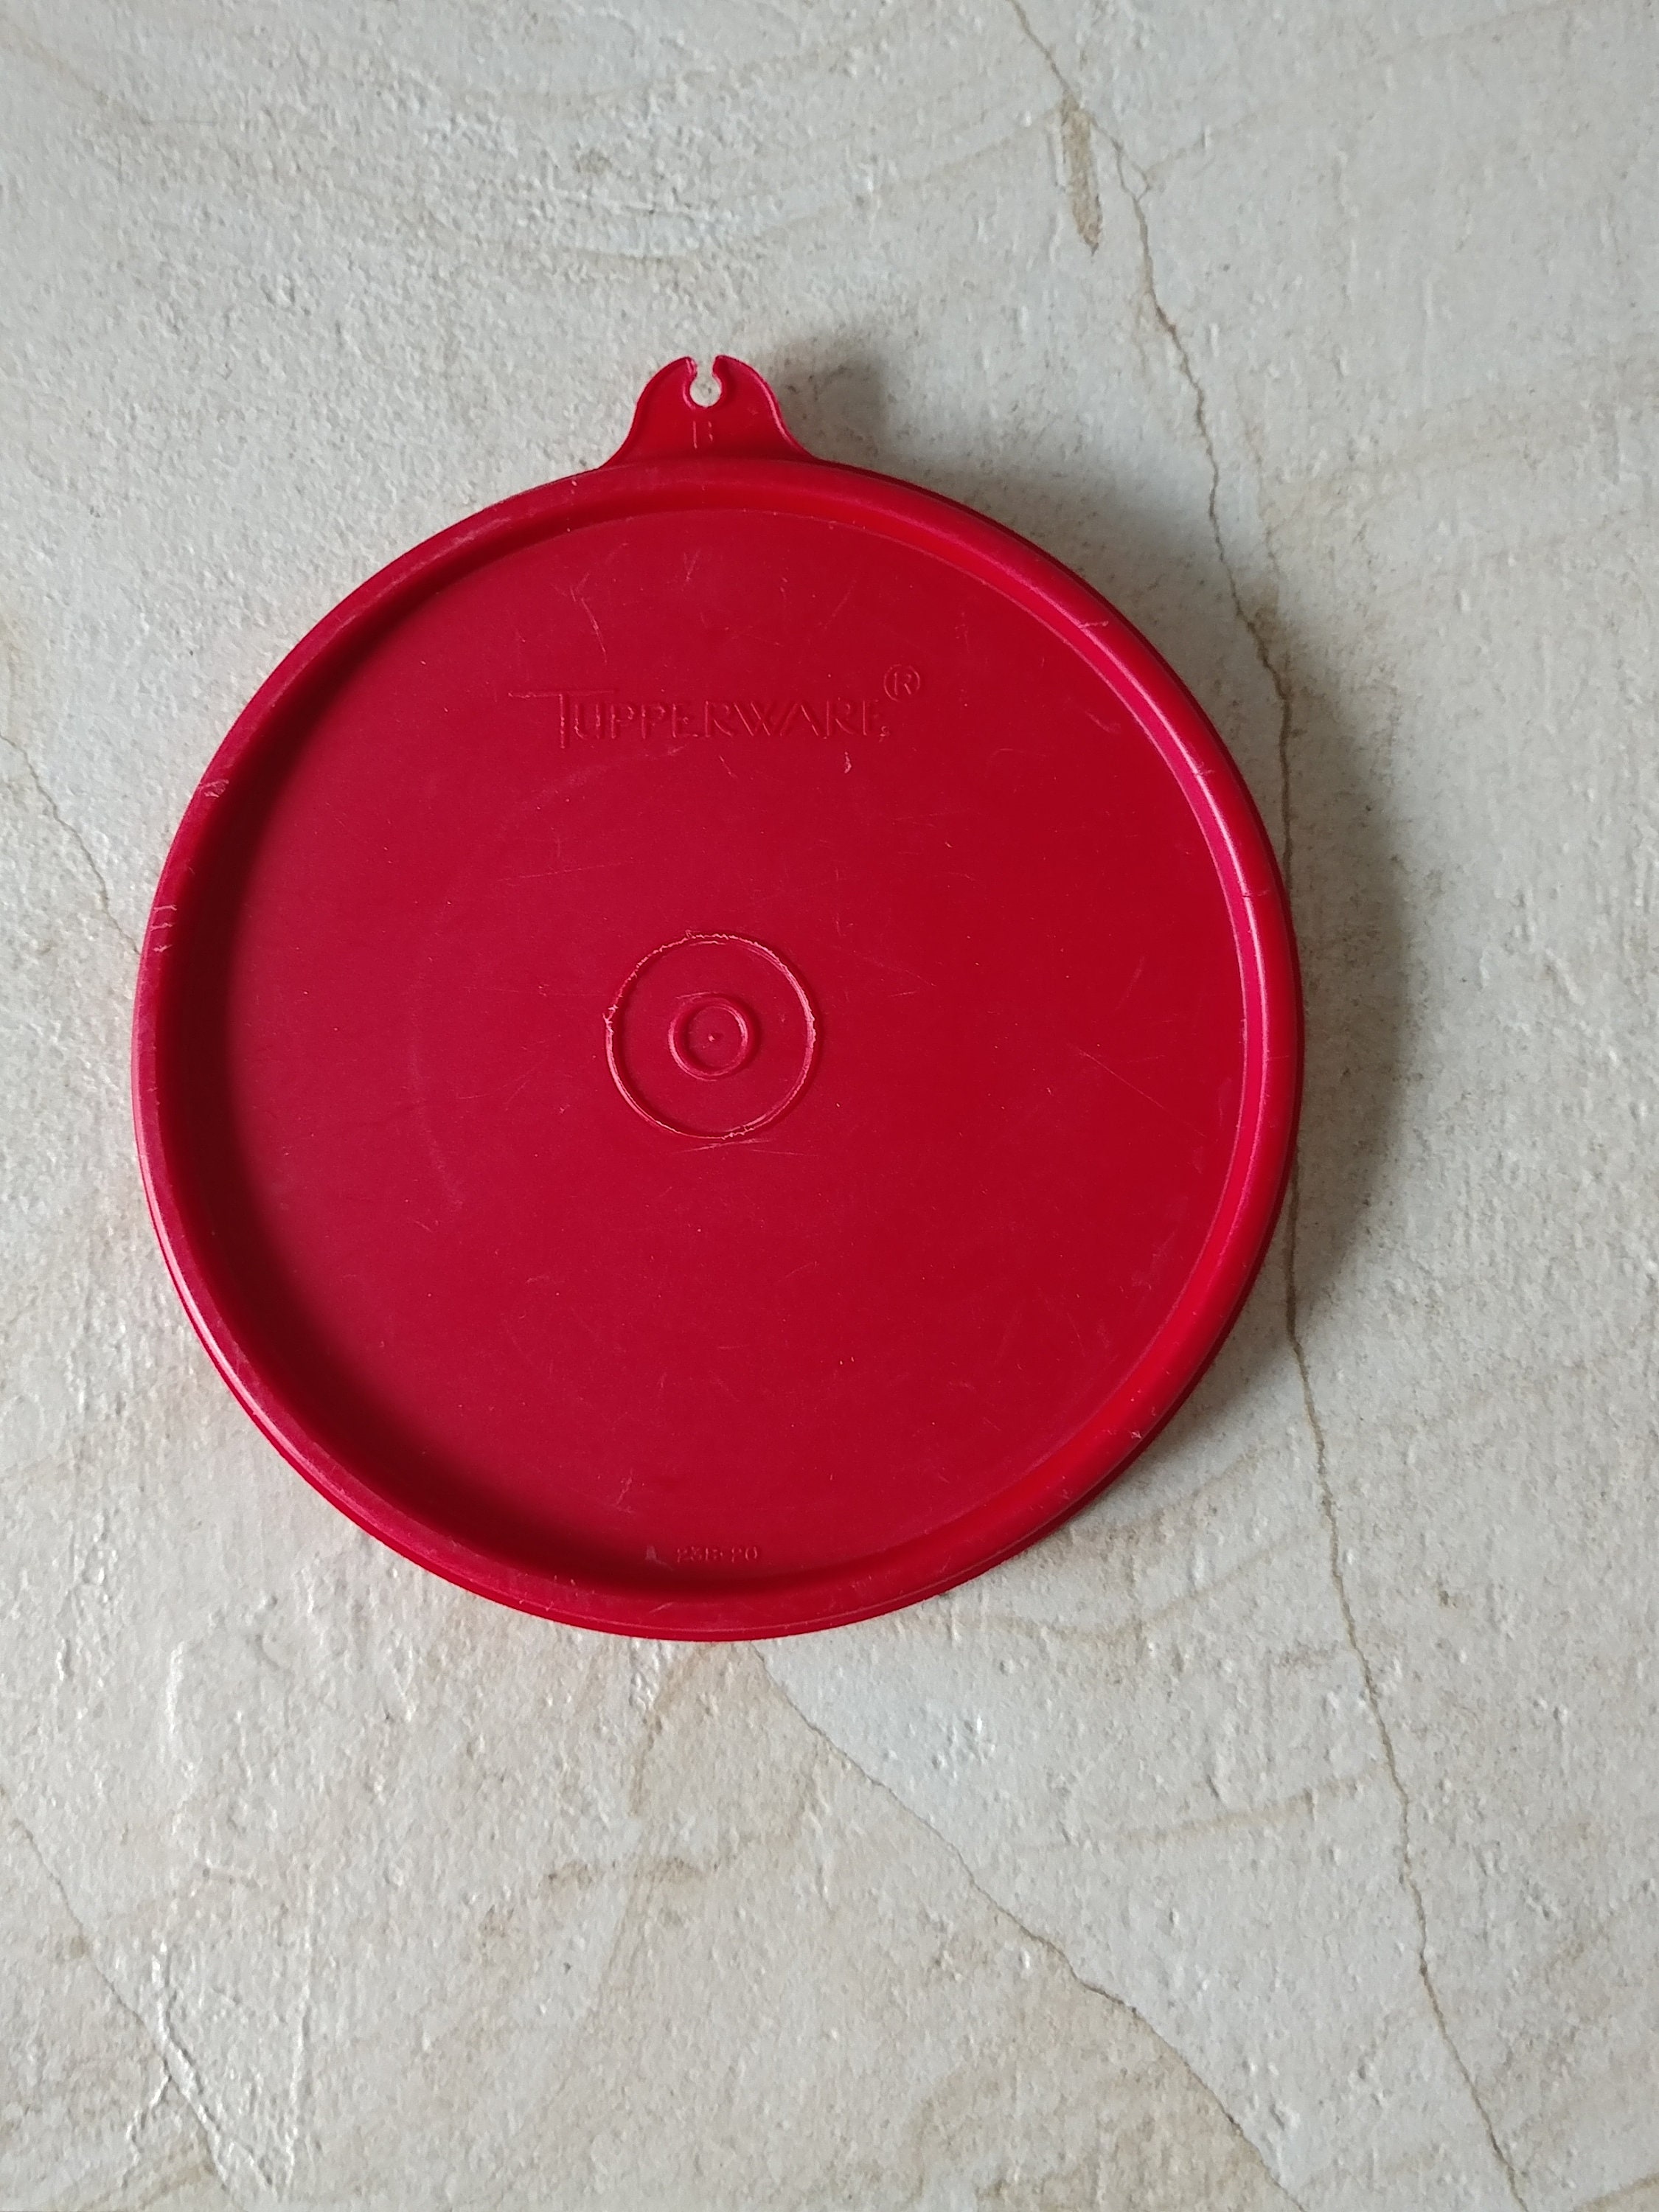 Tupperware 227 replacement lids only 6 inch inside groove diameter C lid